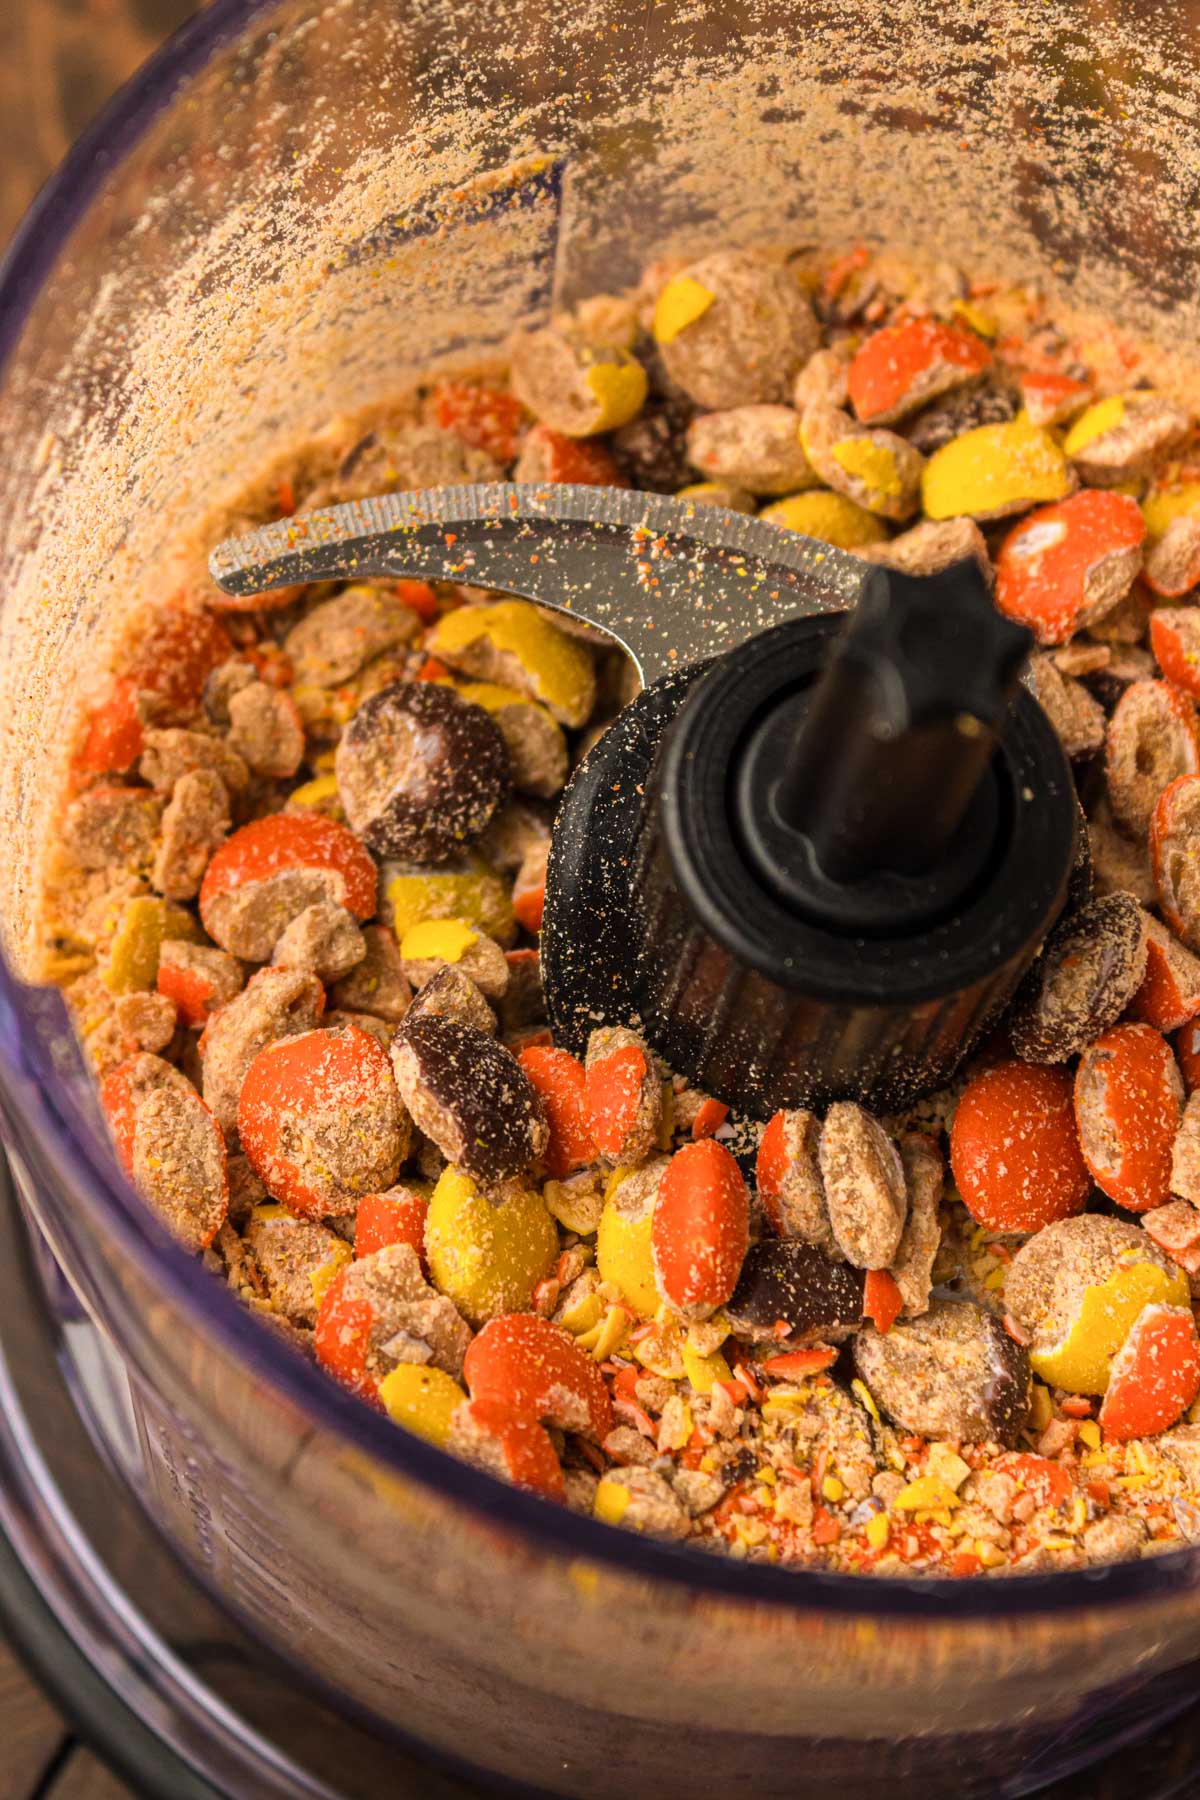 Reese's Pieces in a food processor.